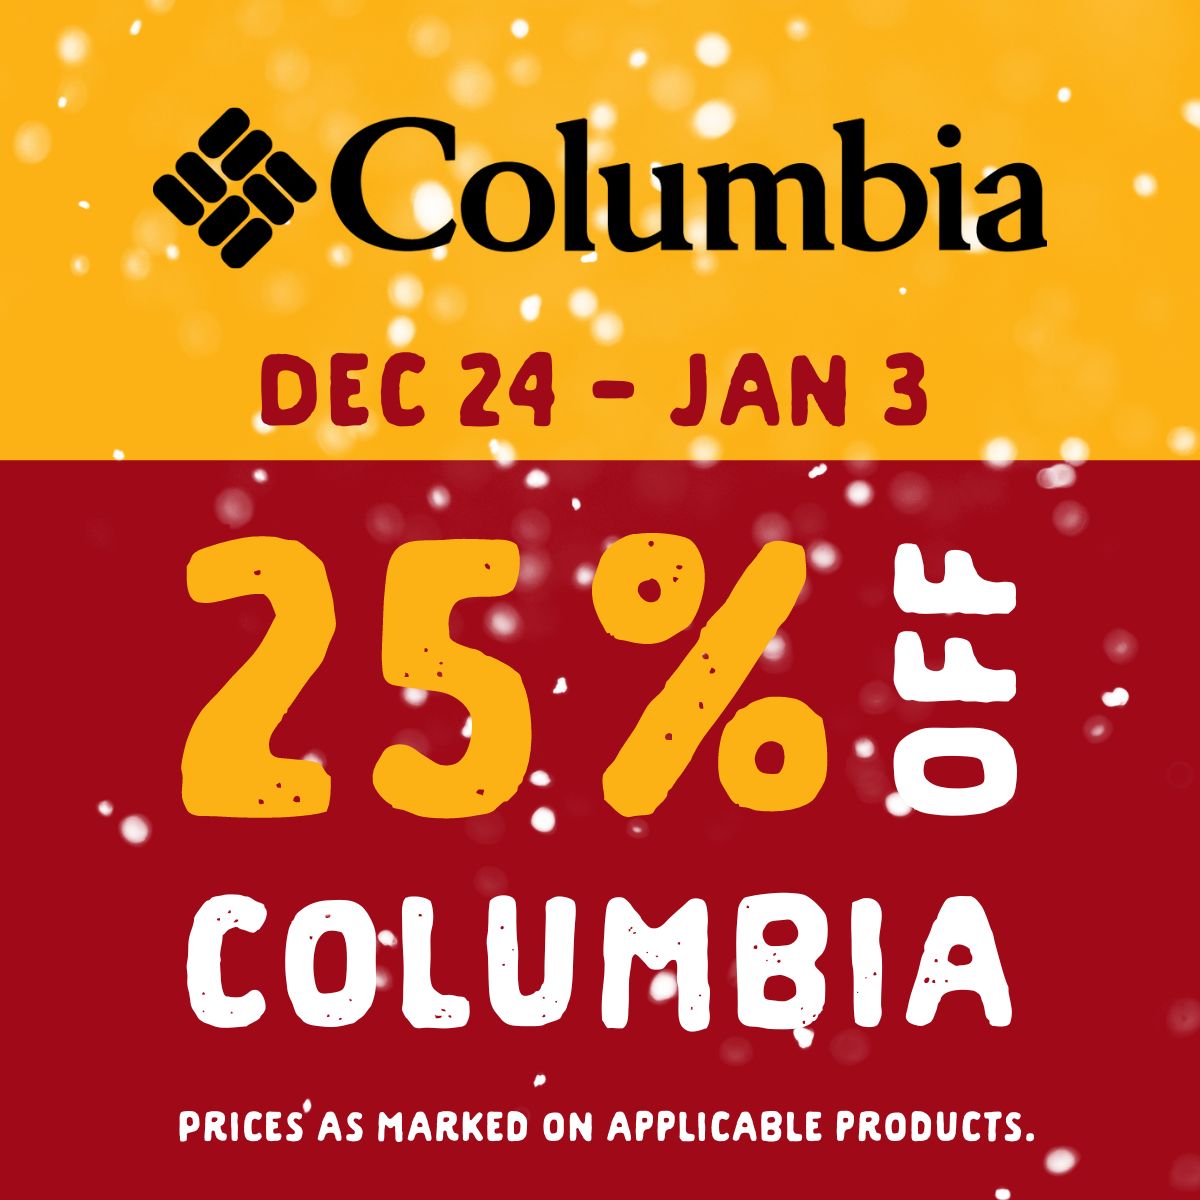 25% off Columbia from December 24 until January 3. Prices as marked on applicable products.